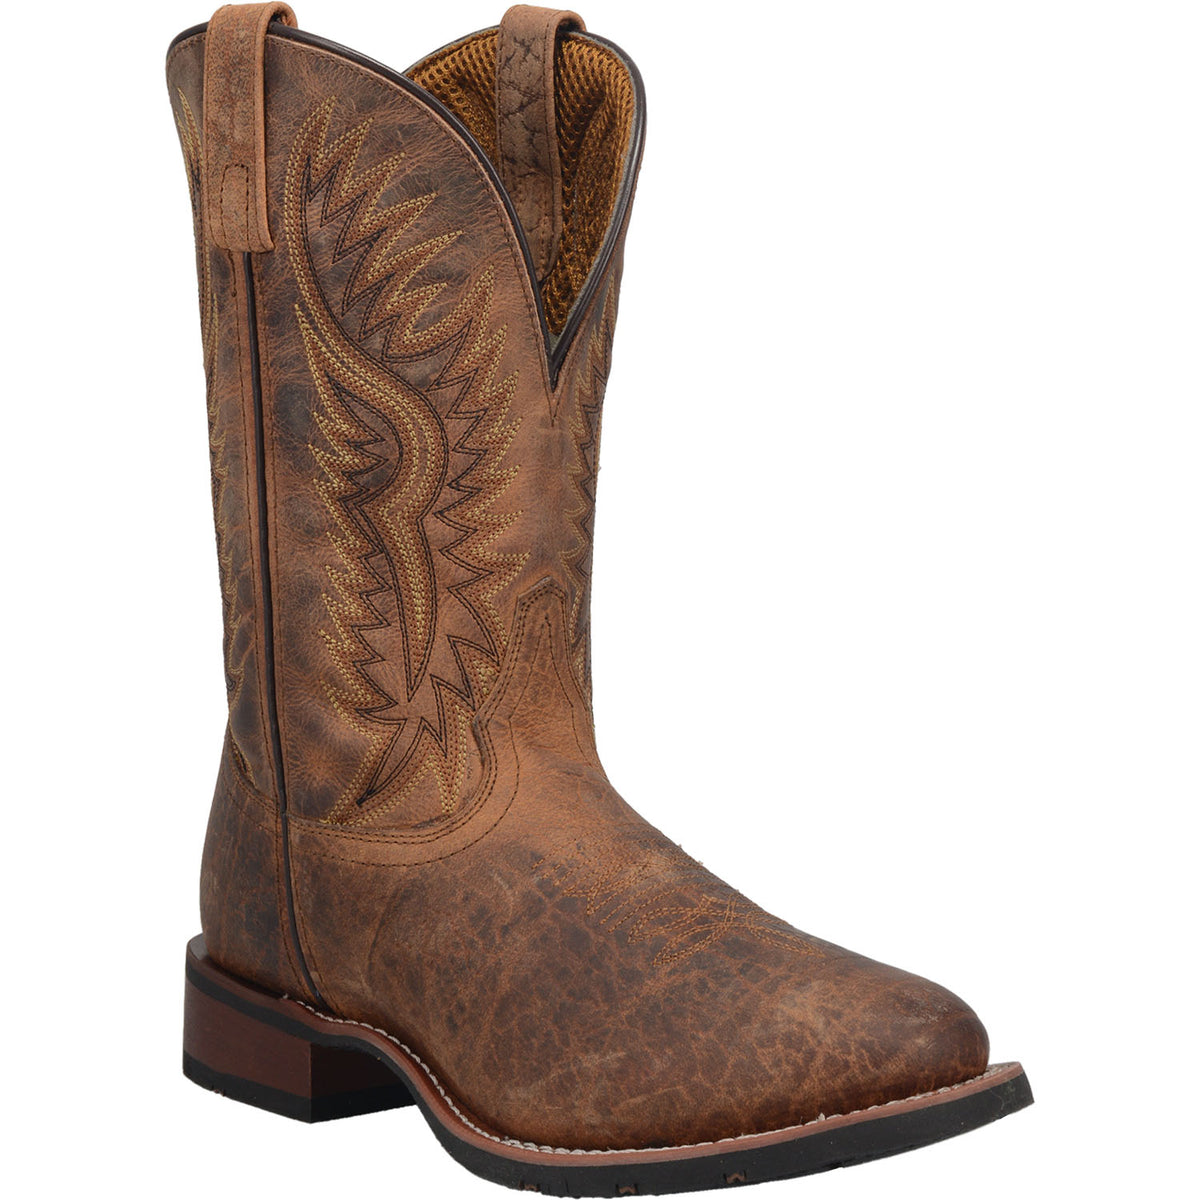 PINETOP LEATHER BOOT Cover